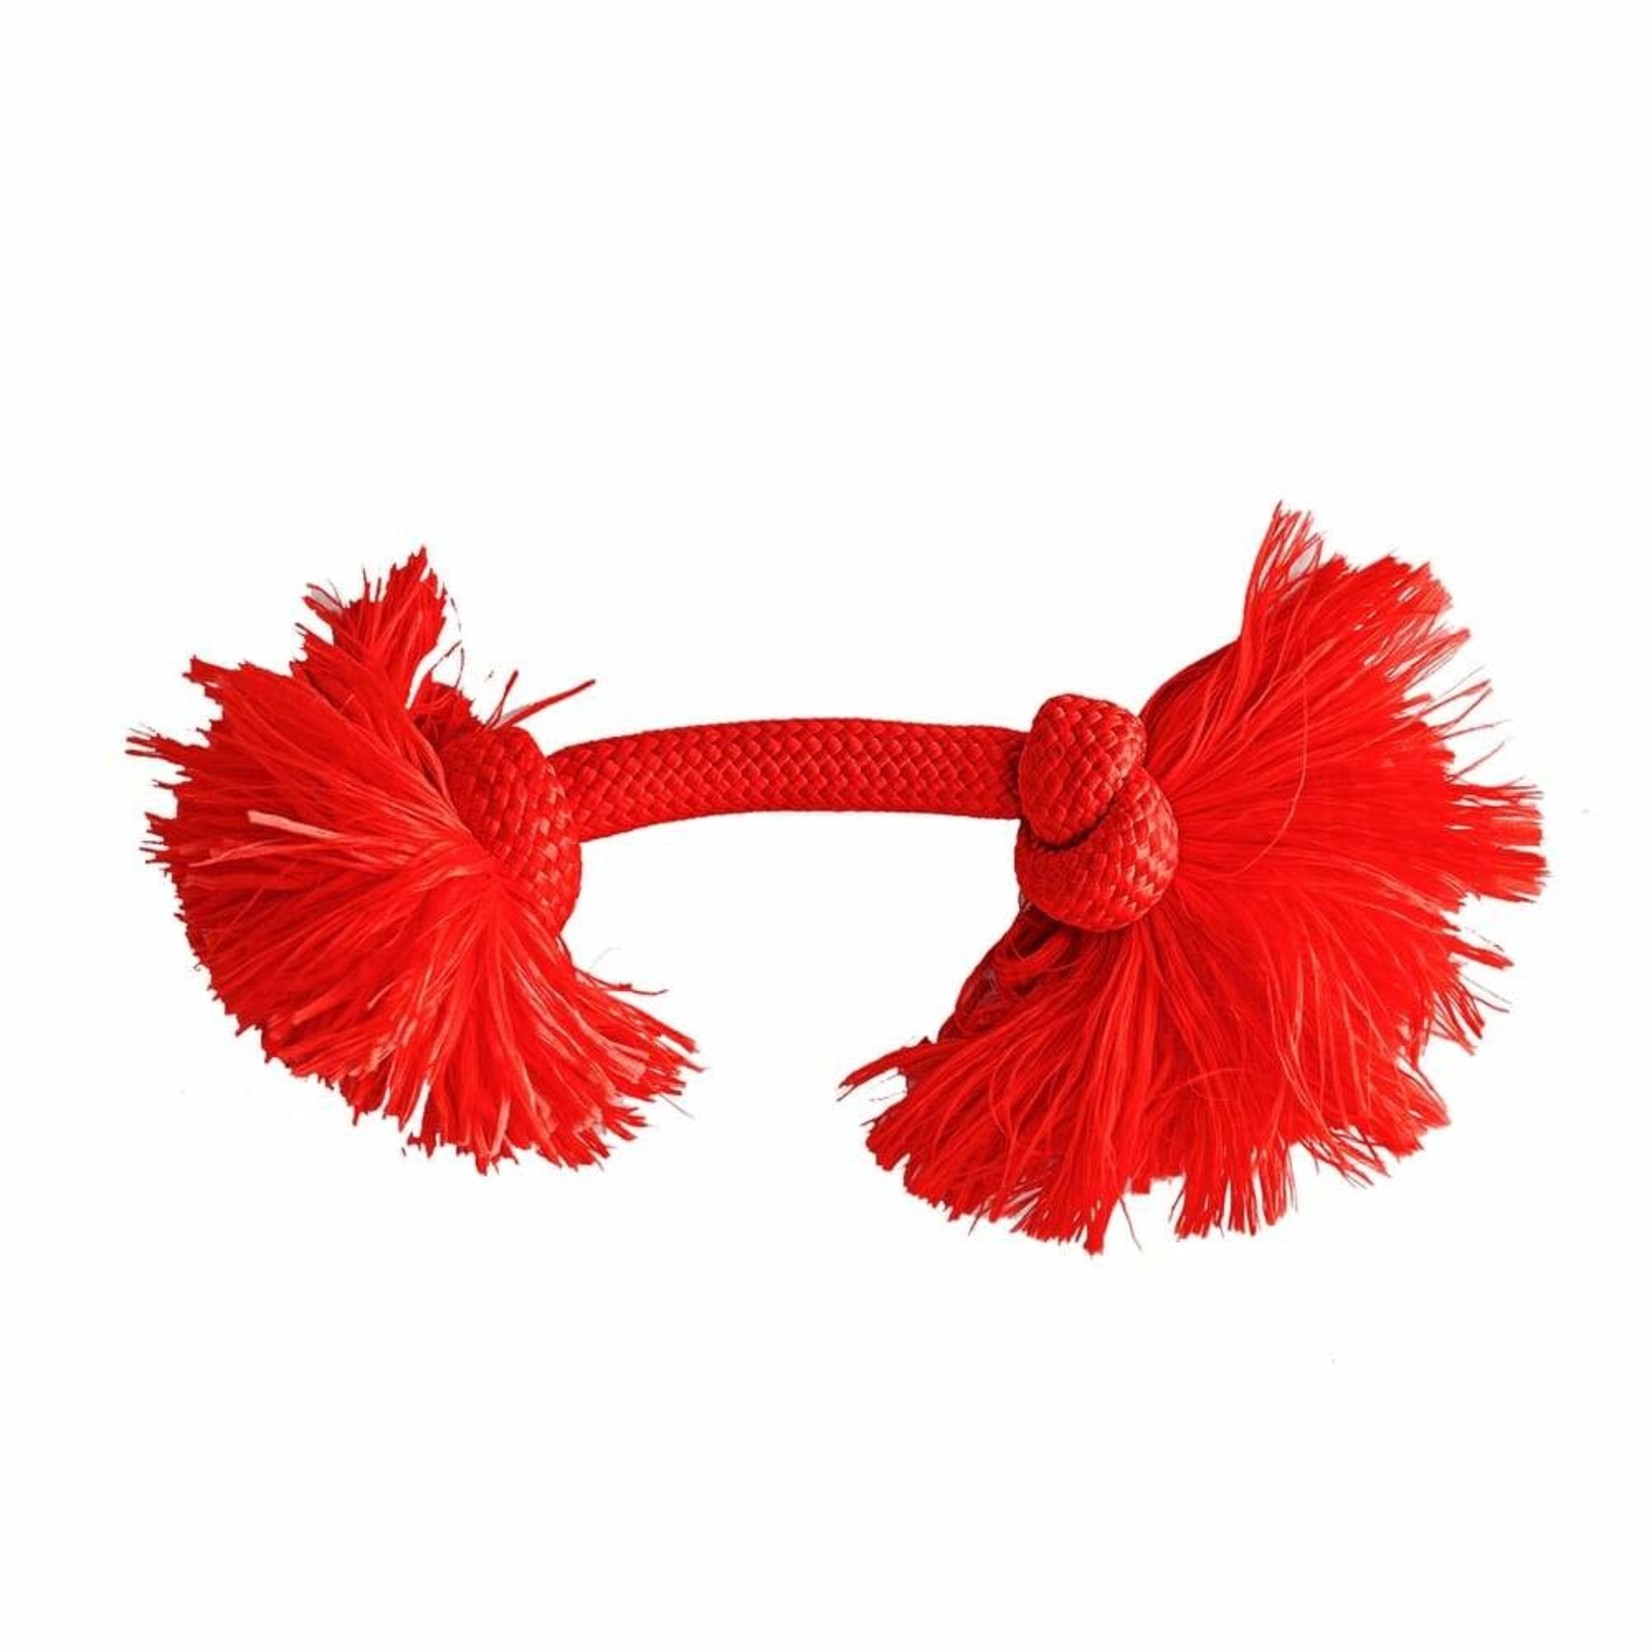 Playology Dri-Tech Rope Scented Dog Toy